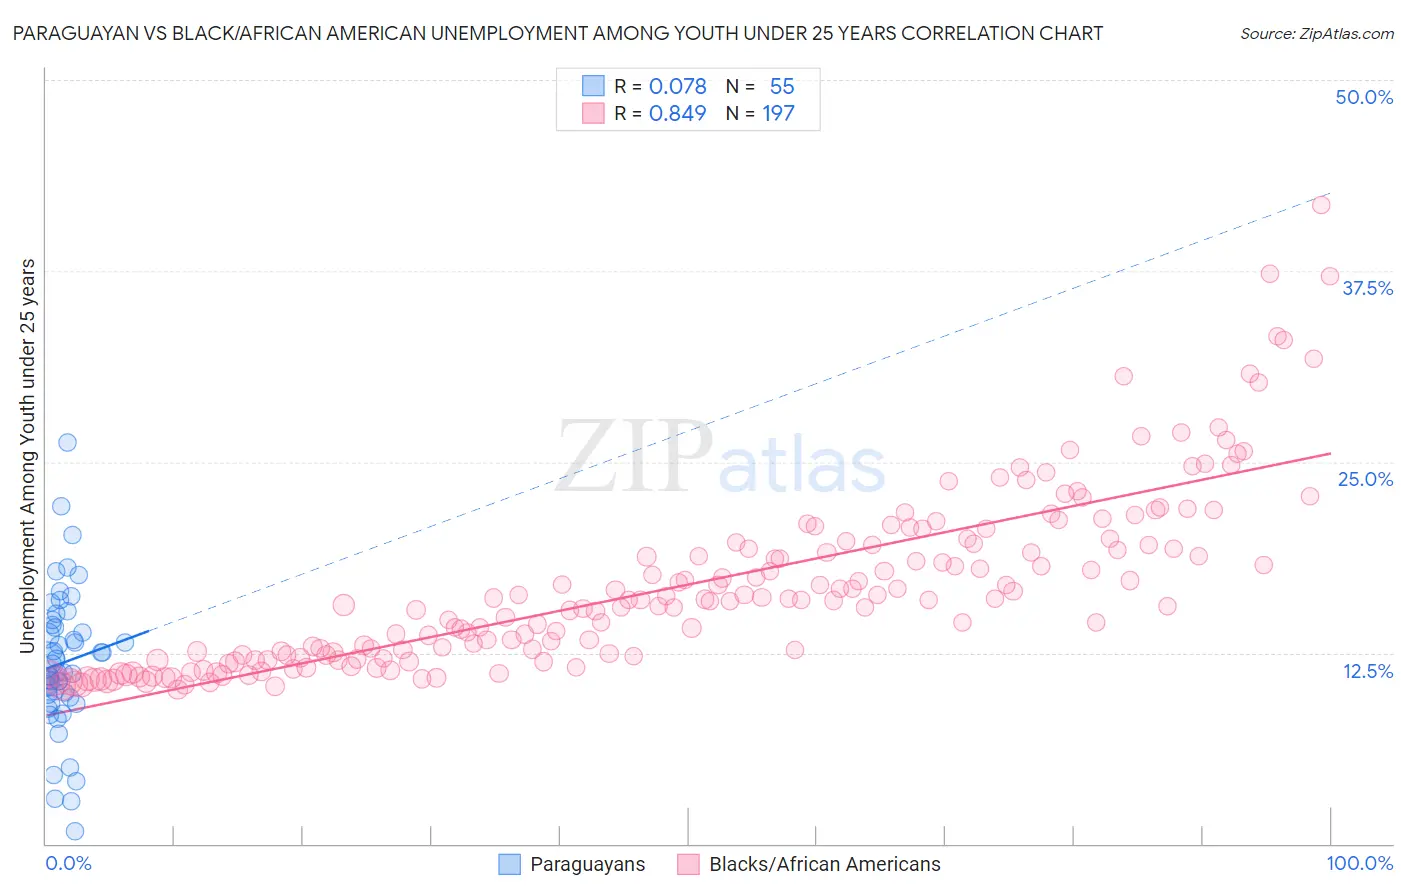 Paraguayan vs Black/African American Unemployment Among Youth under 25 years